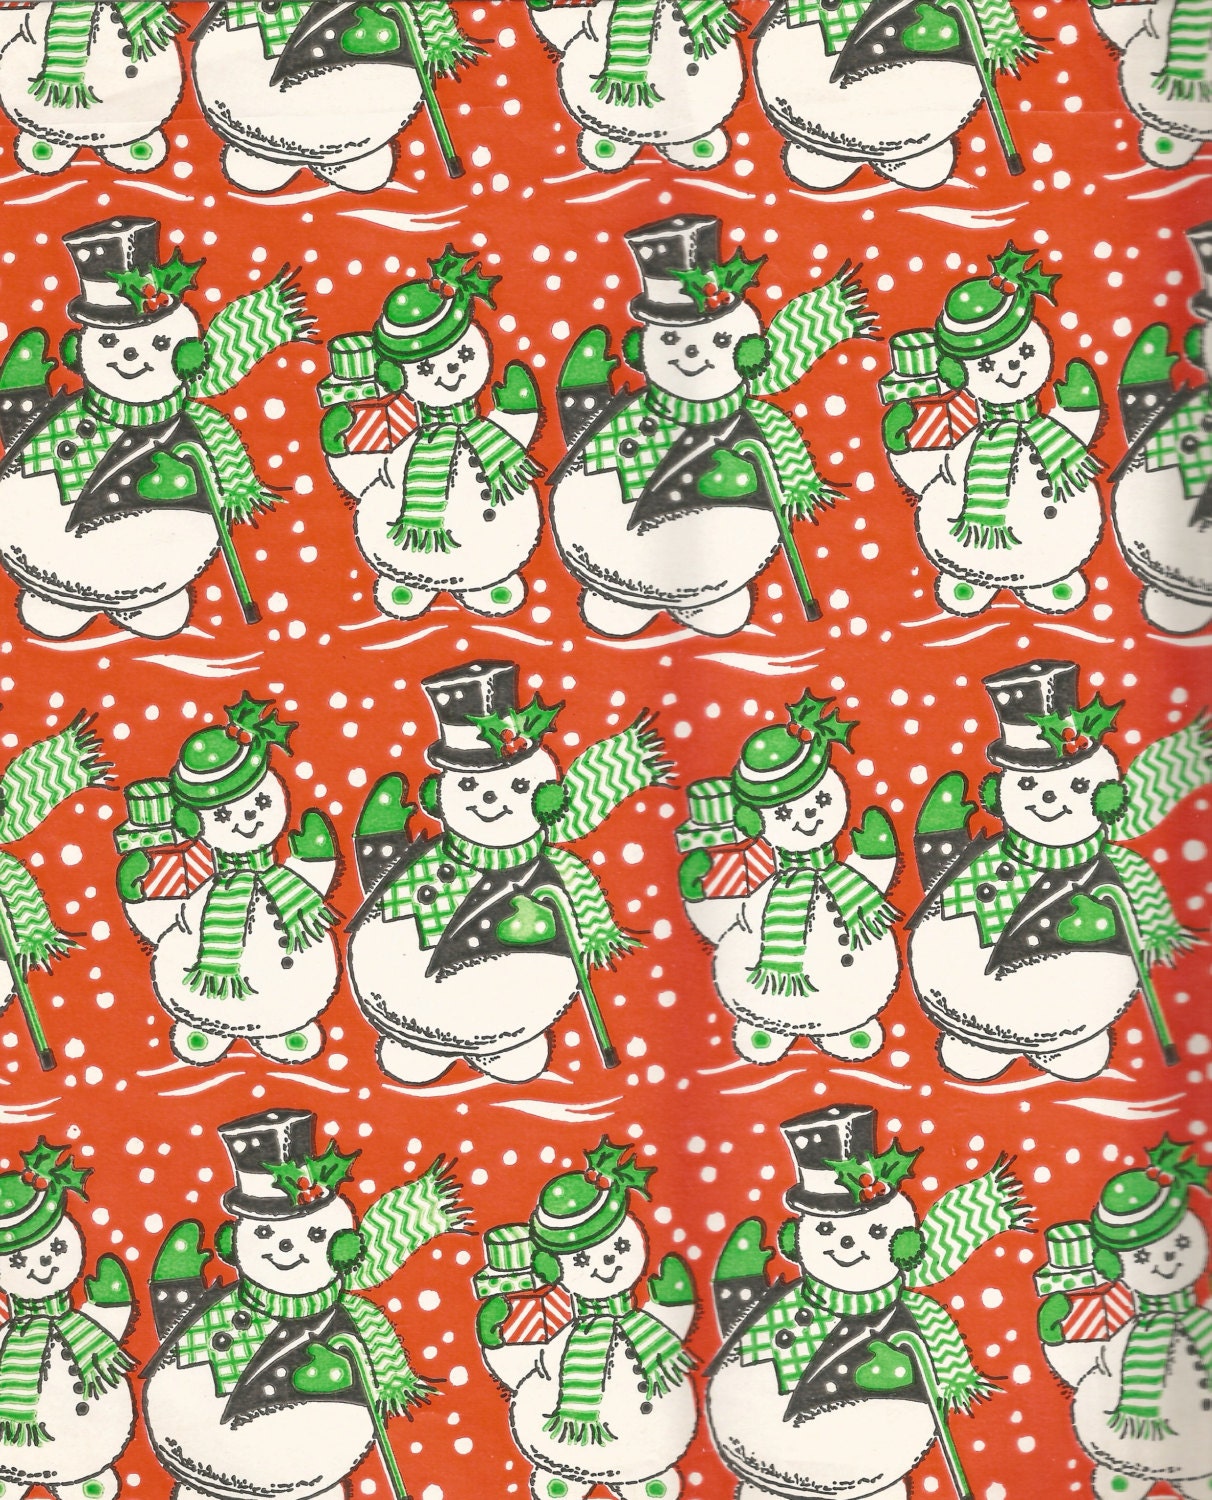 Vintage Christmas Wrapping Paper Download Printable Snowmen -   Vintage  christmas wrapping paper, Vintage wrapping paper, Christmas wrapping